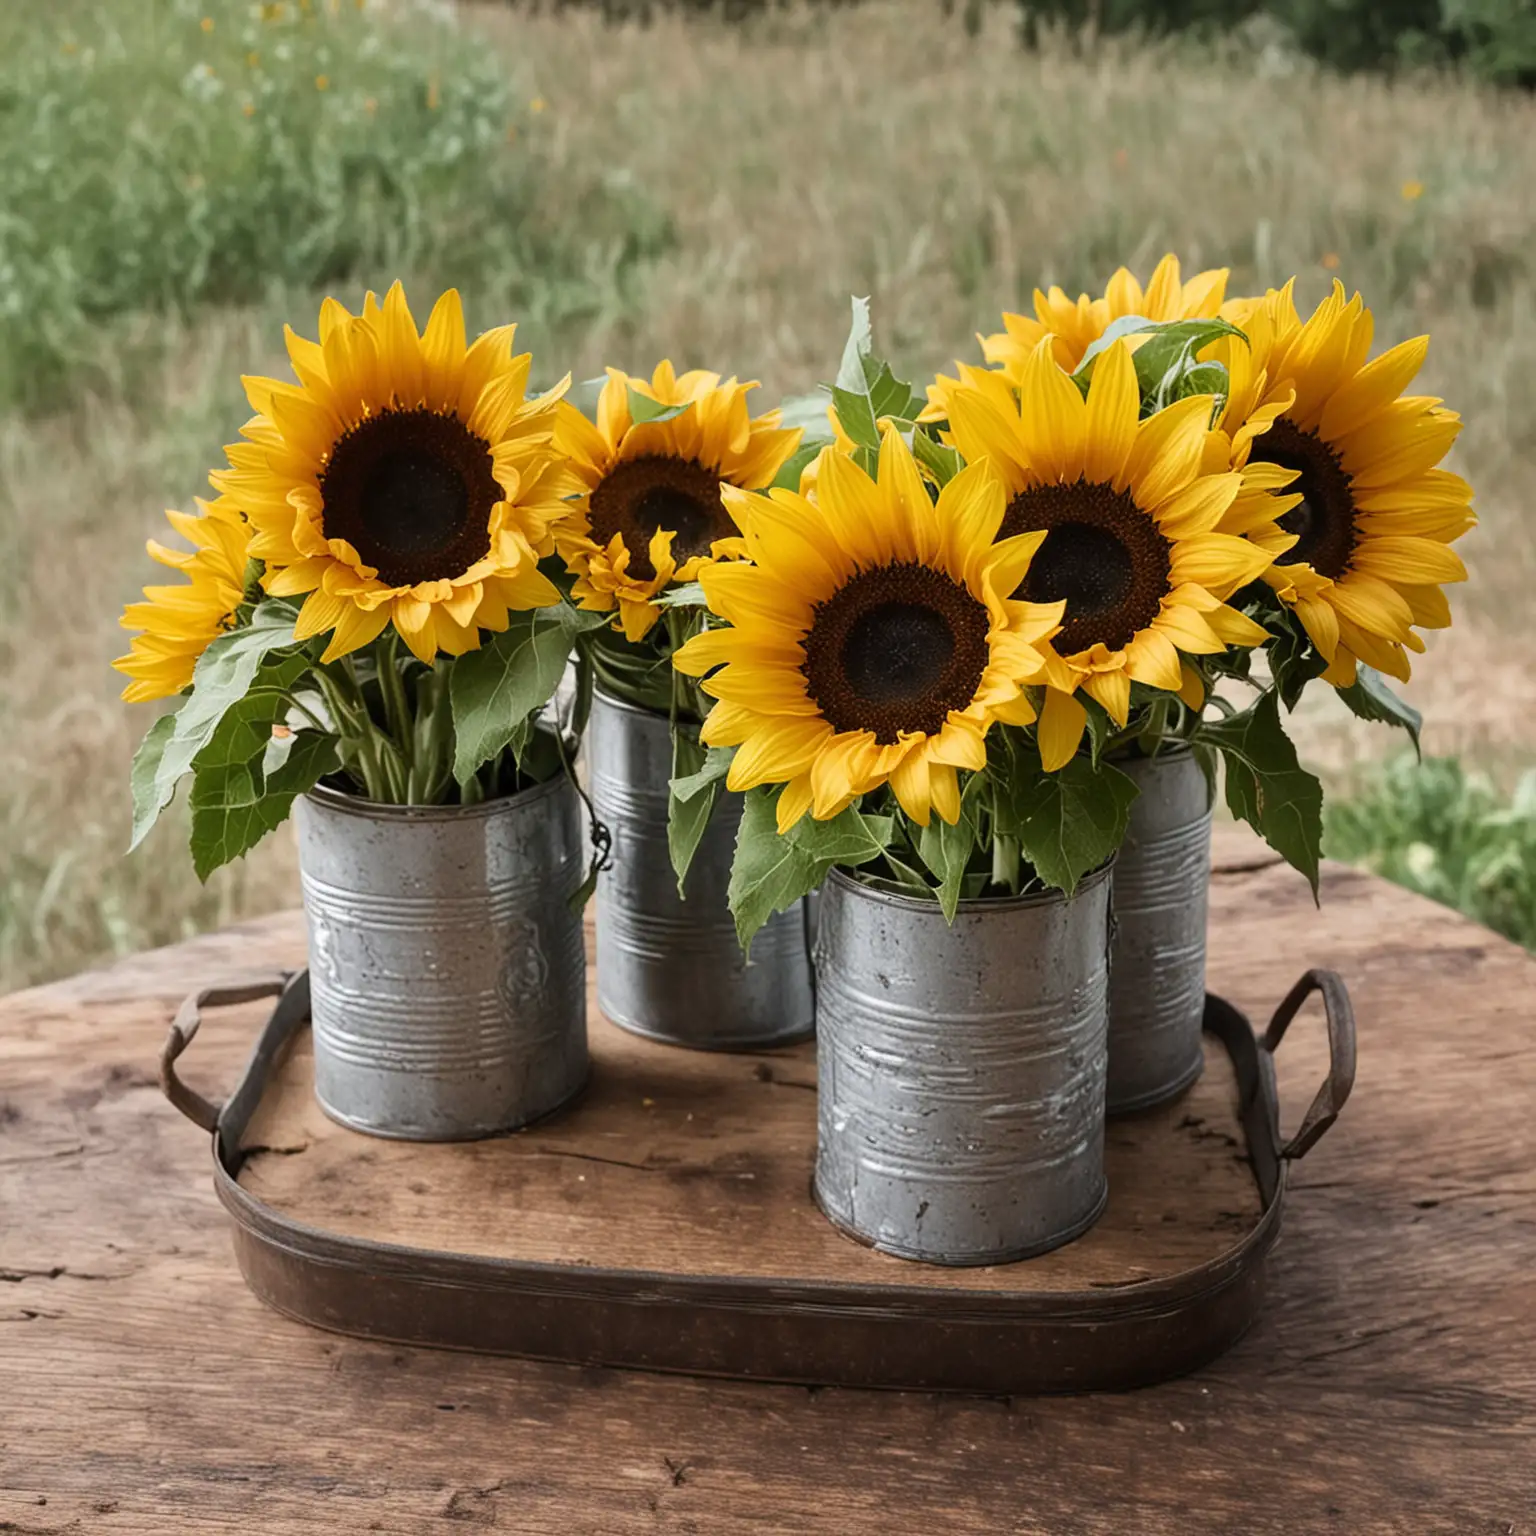 a small and simple rustic centerpiece with sunflowers in rustic tin can vases